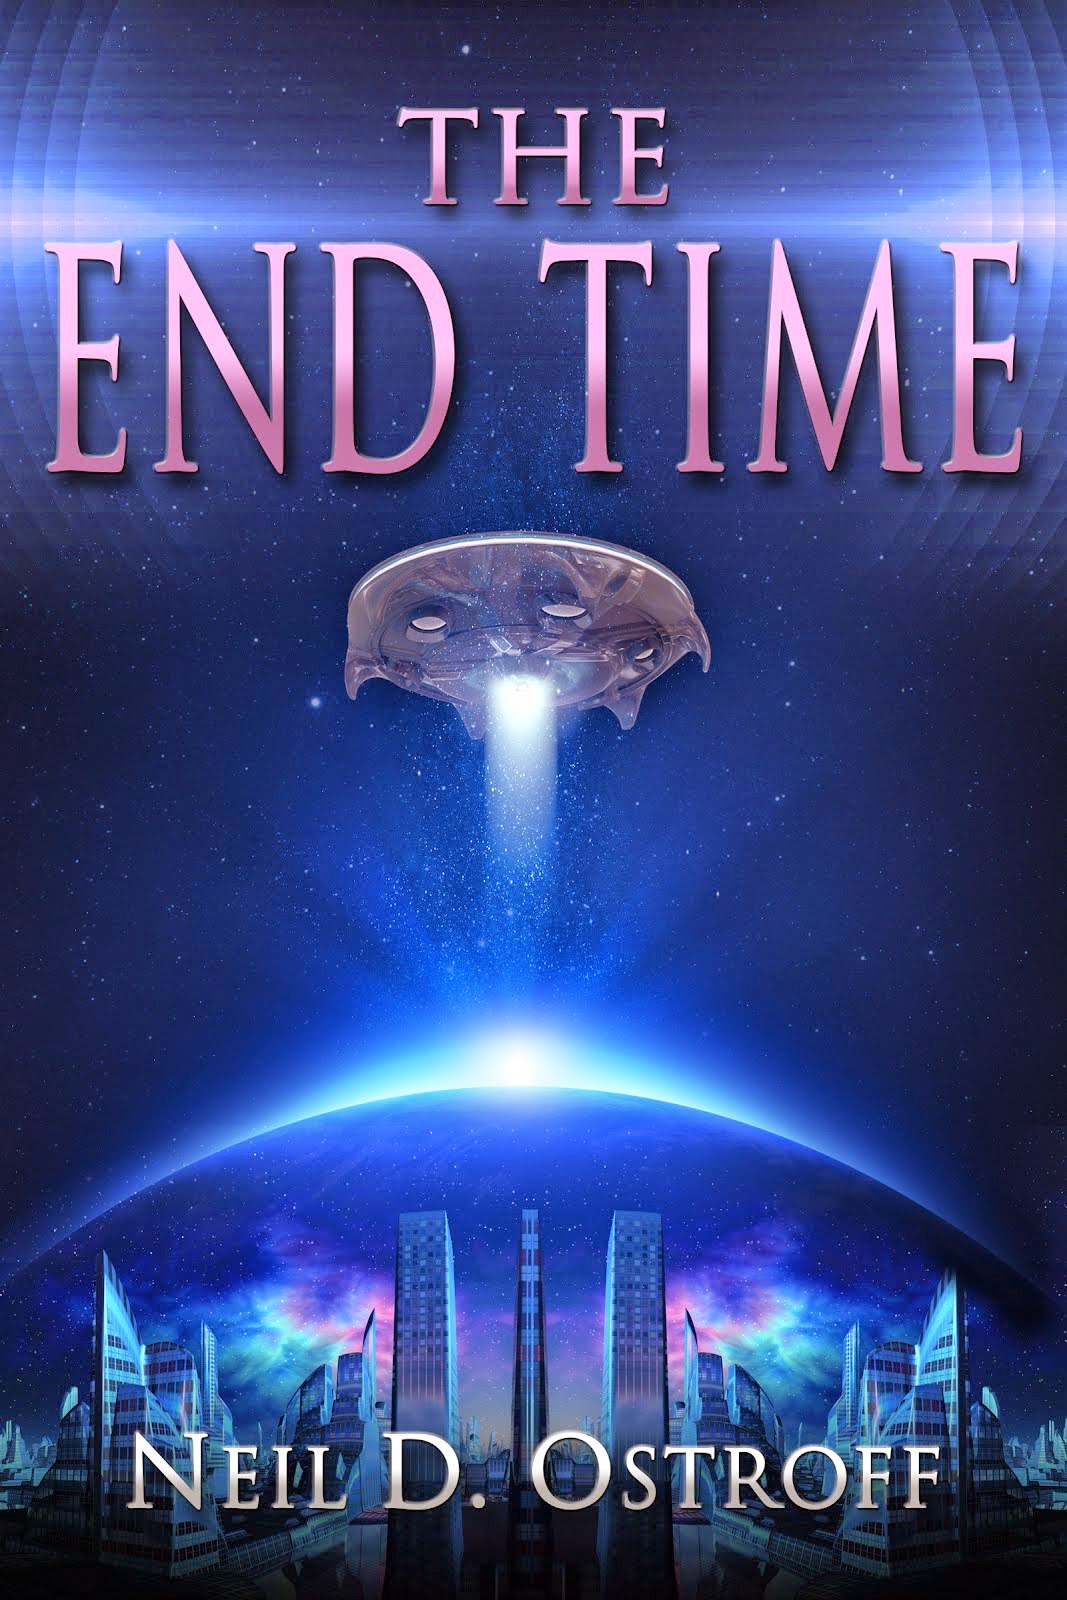 THE END TIME